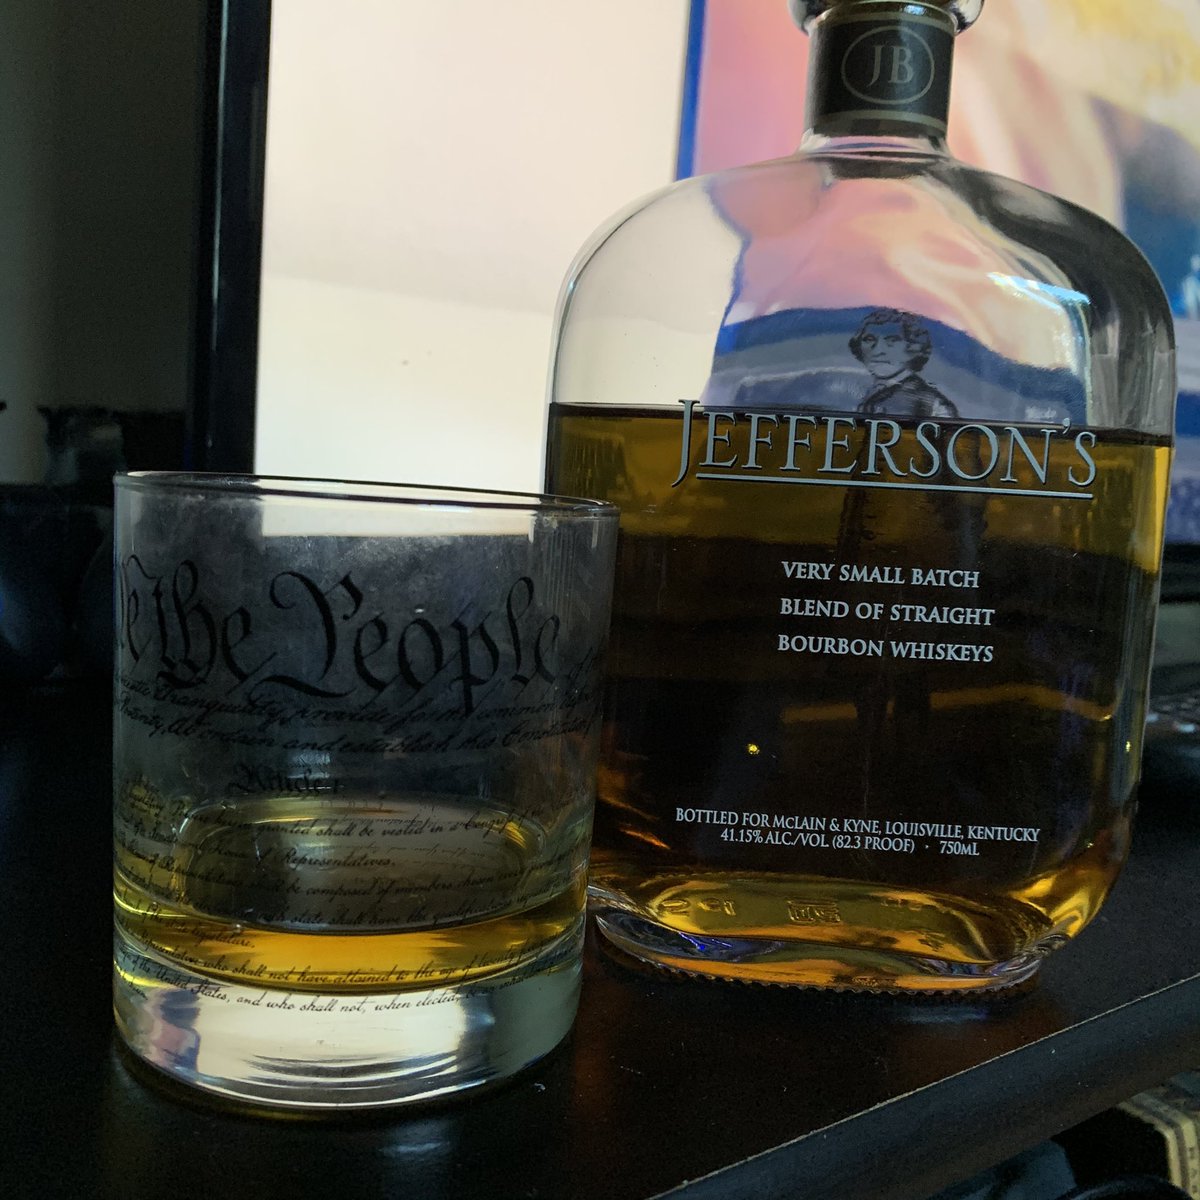 And and totally drinking Jefferson’s in my We the People glass   #HATM